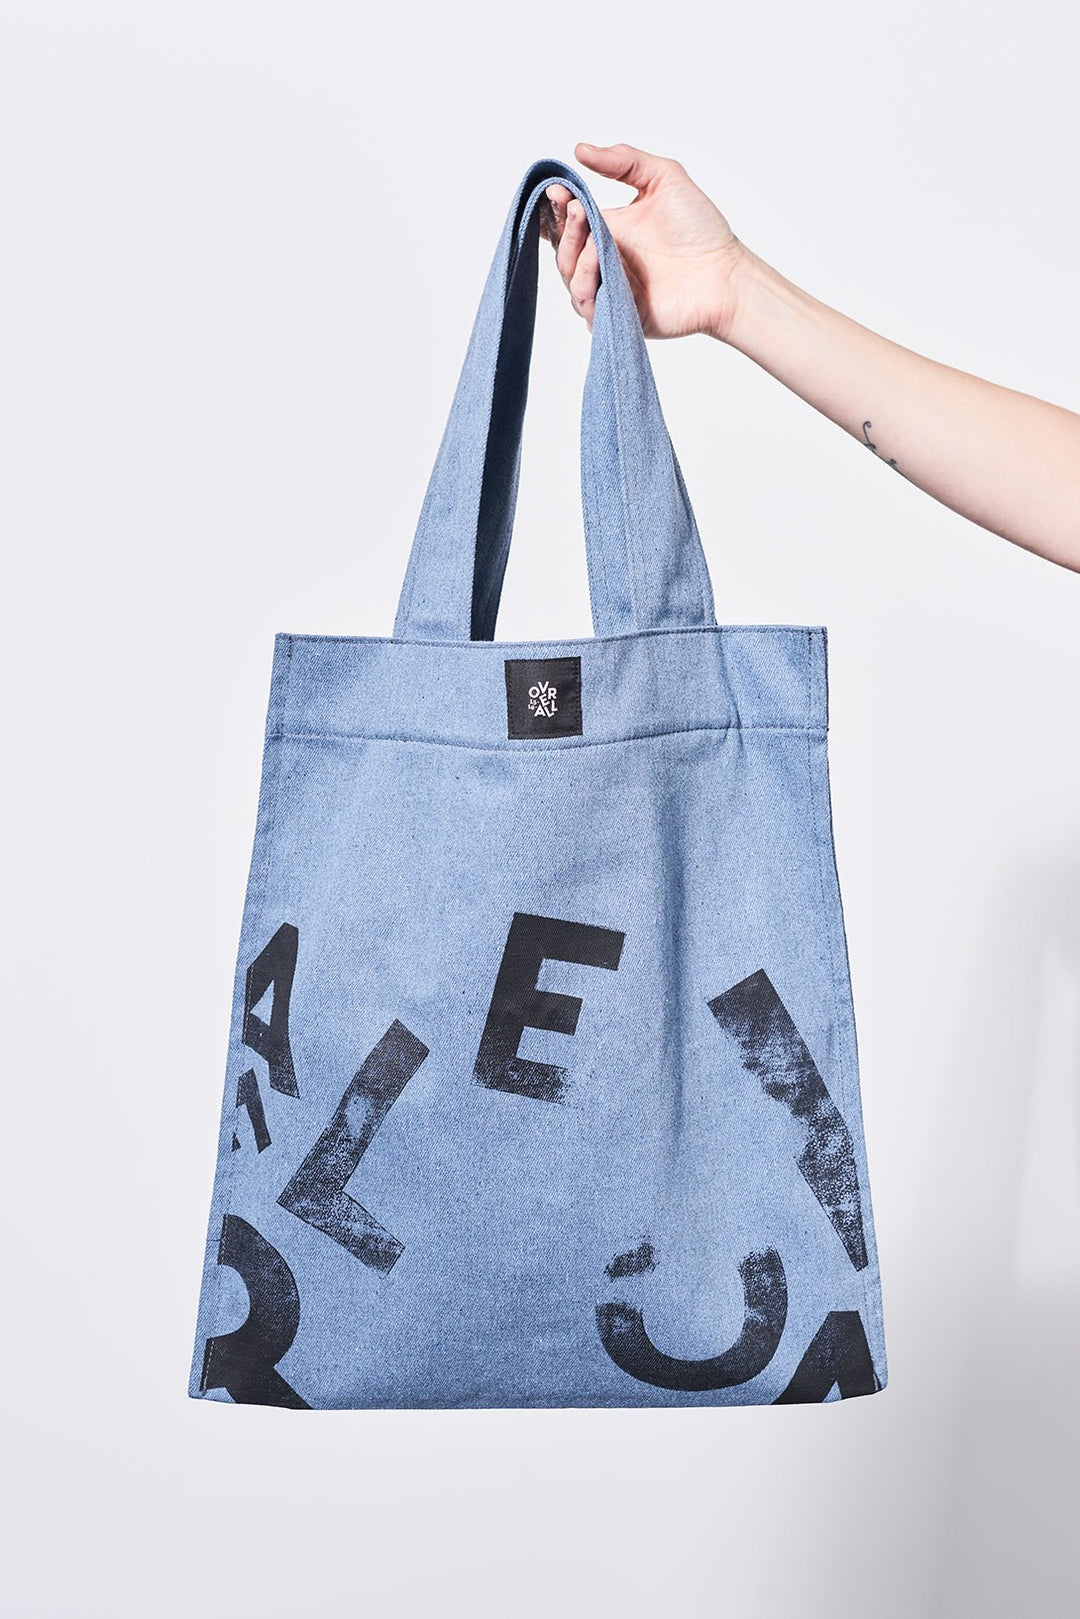 Galerie Recycled Denim Tote - Over All 1516